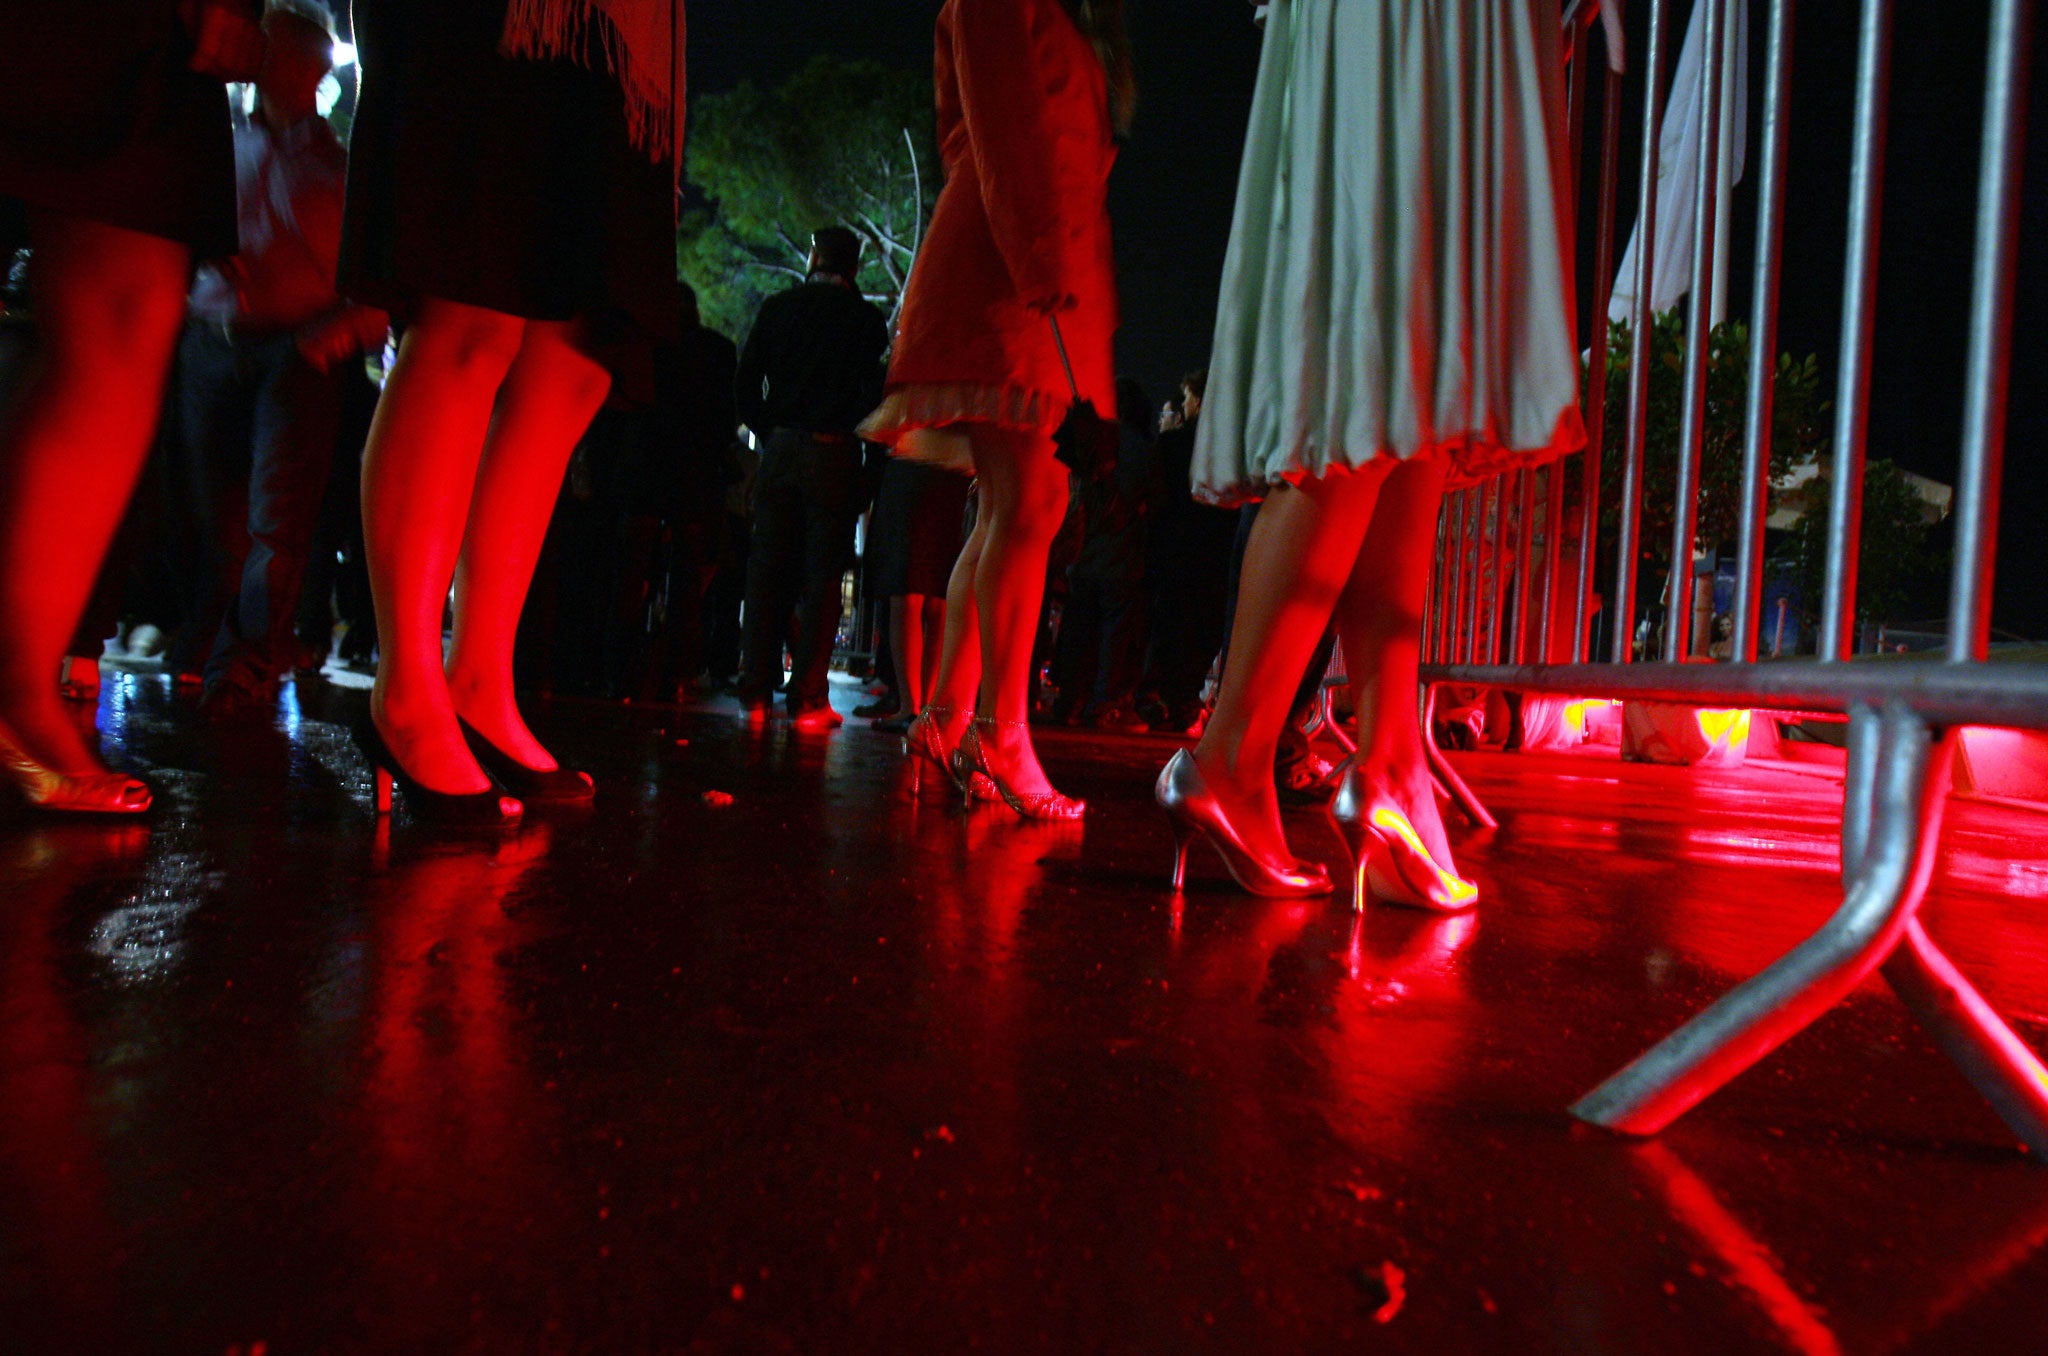 Women arrive to enter a nightclub during the 61st Cannes International Film Festival on May 17, 2008 in Cannes, southern France.